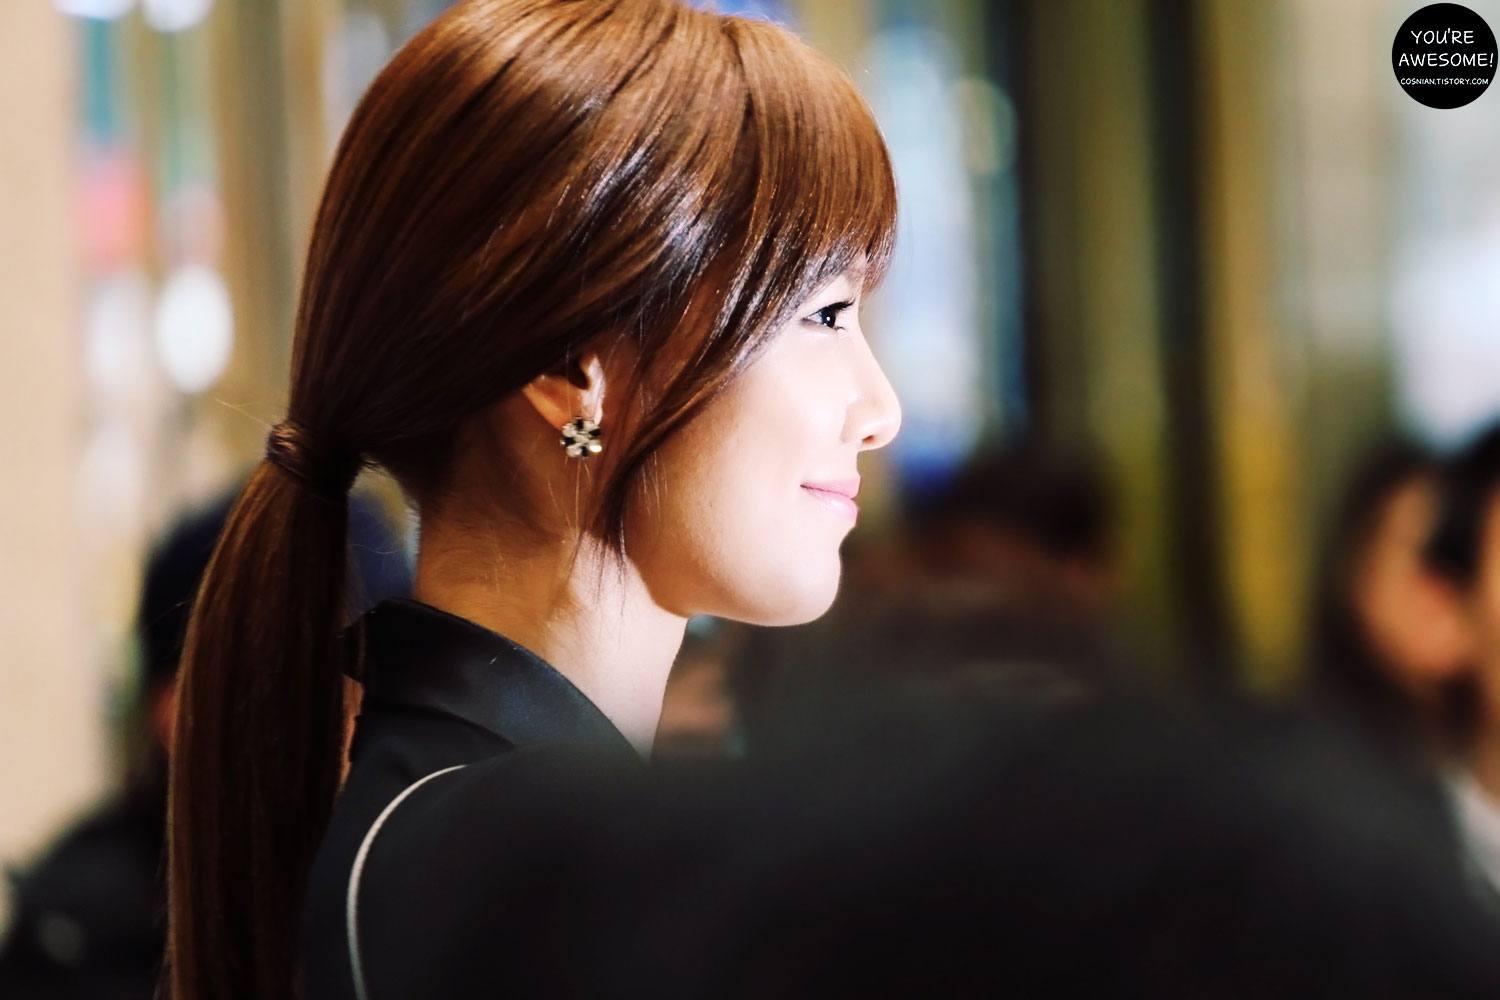 Sooyoung Double-M fan signing